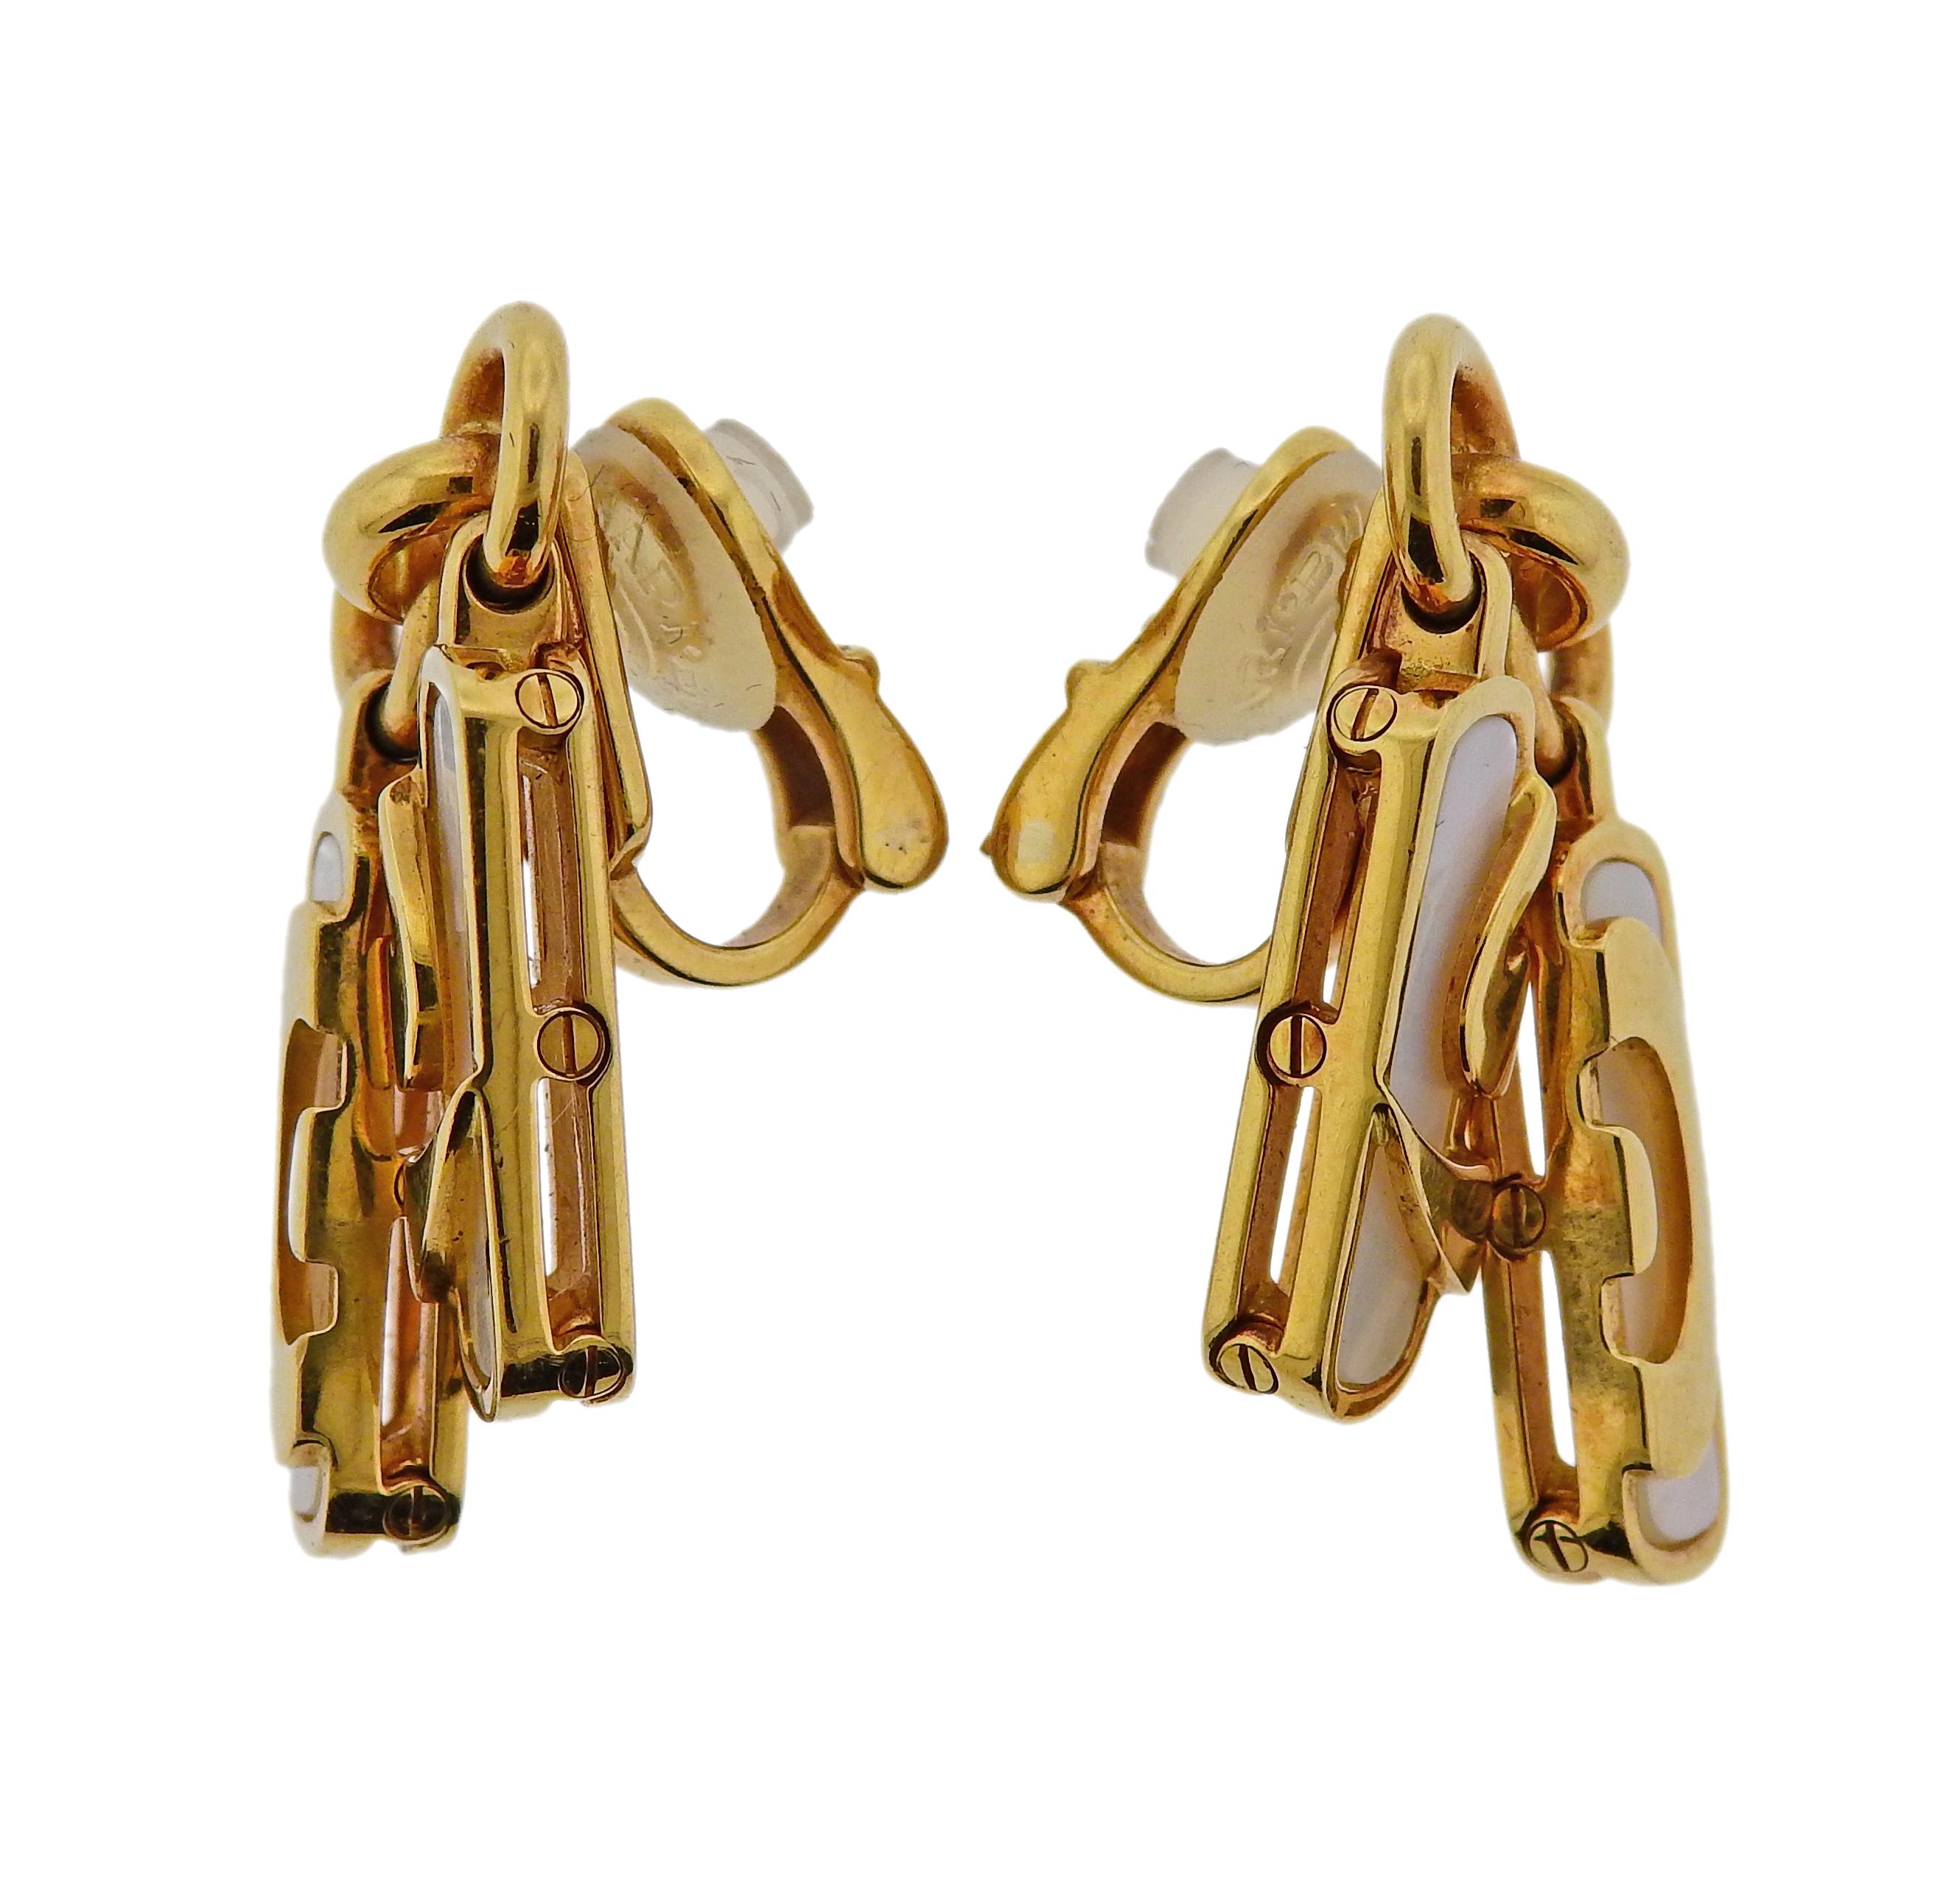 Pair of 18k gold Bulgari earrings from Optical Illusion collection, set with mother of pearl. Measure 31mm x 16mm. Marked Bvlgari, made in Italy, 750. Weigh 21.6 grams.

SKU#E-02718